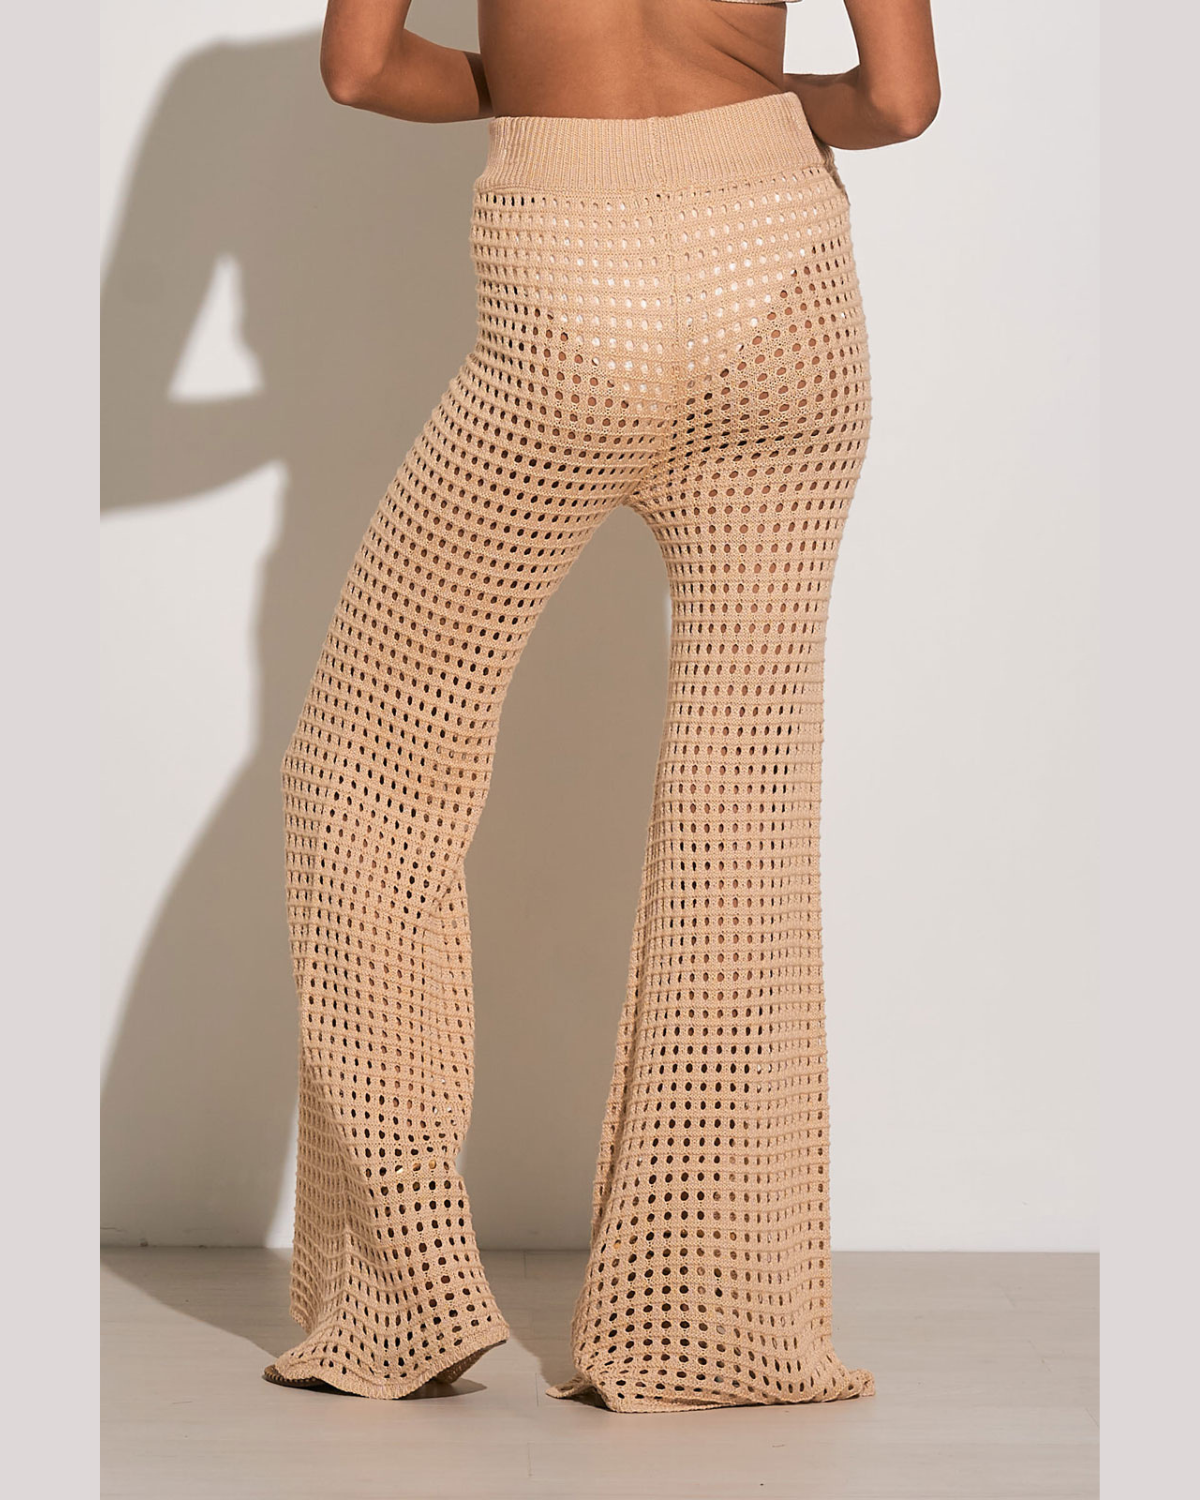 Model wearing a crochet pant cover up in beige